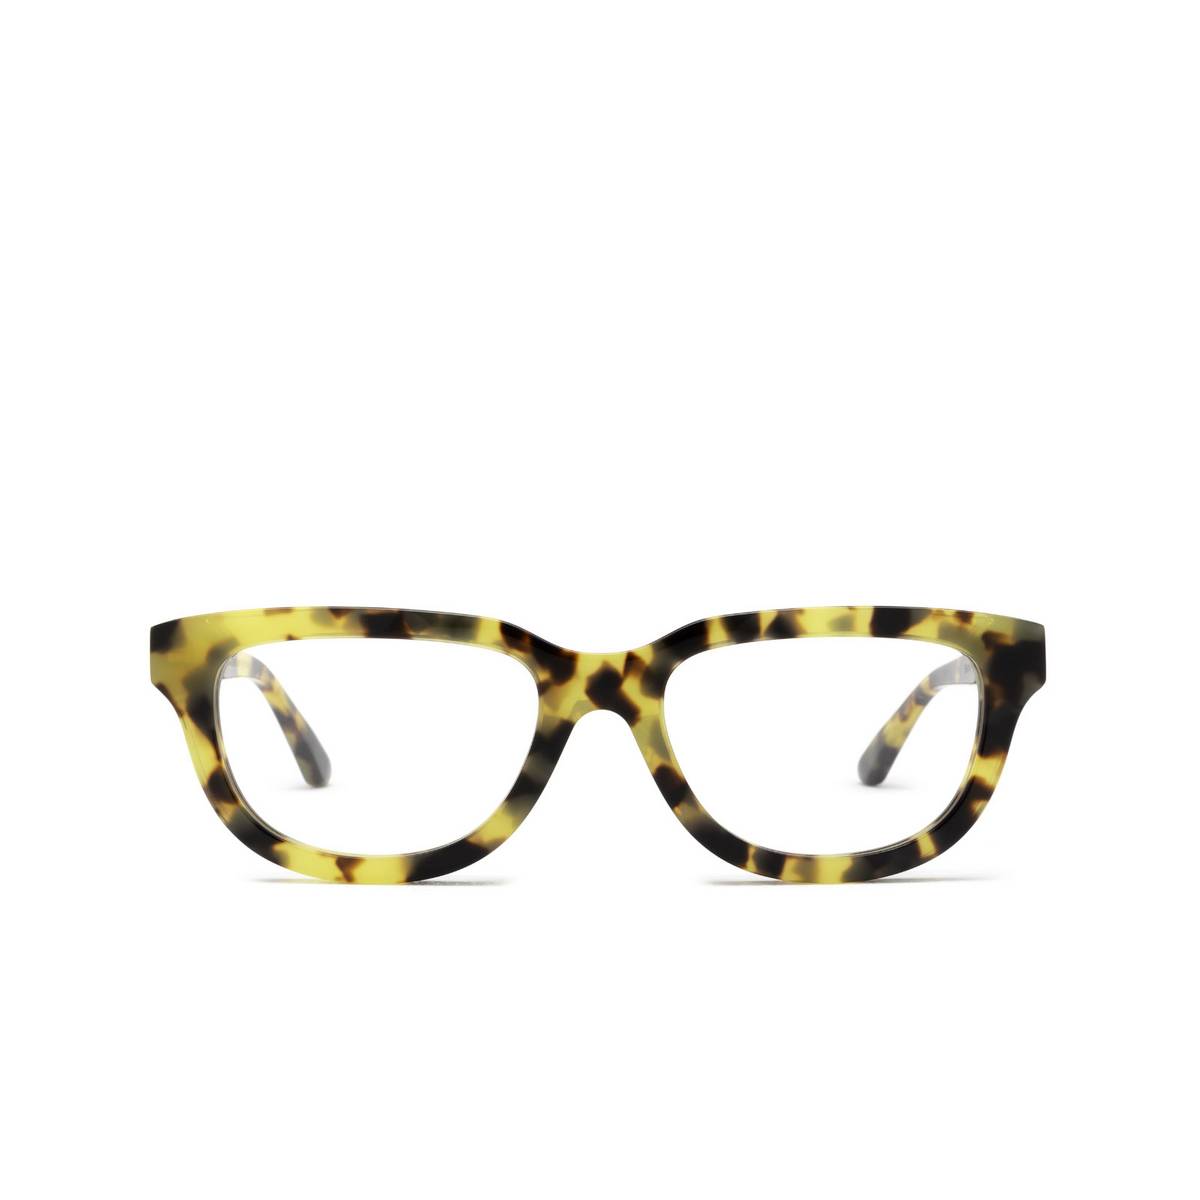 Huma® Square Eyeglasses: Lion Optical color Havana Maculate 19 - front view.